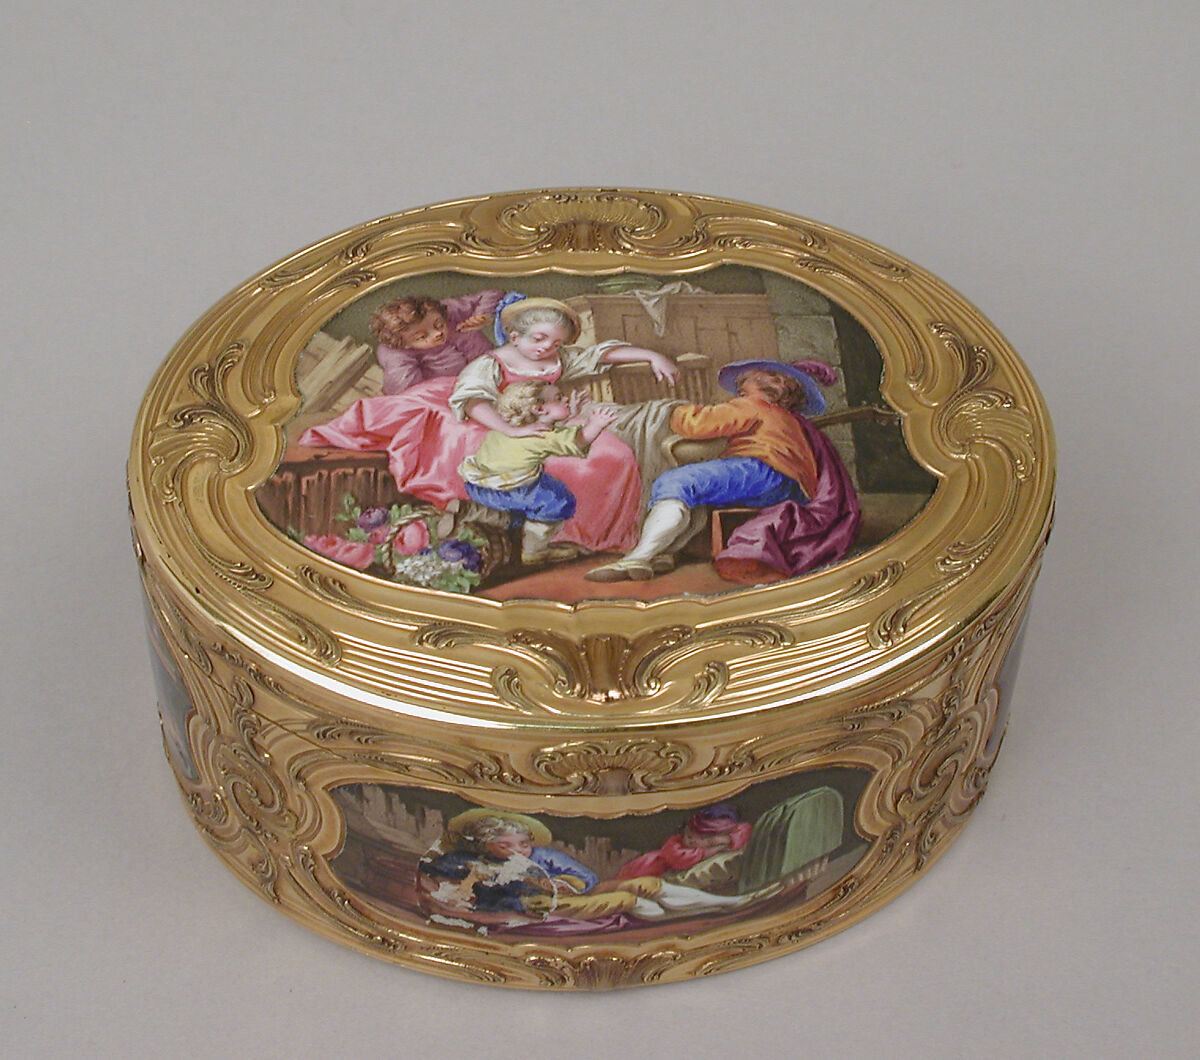 Snuffbox, Possibly by Jean-Charles-Simphorien Dubos (born 1719, master 1748, retired by 1766, recorded 1781), Gold, enamel, French, Paris 